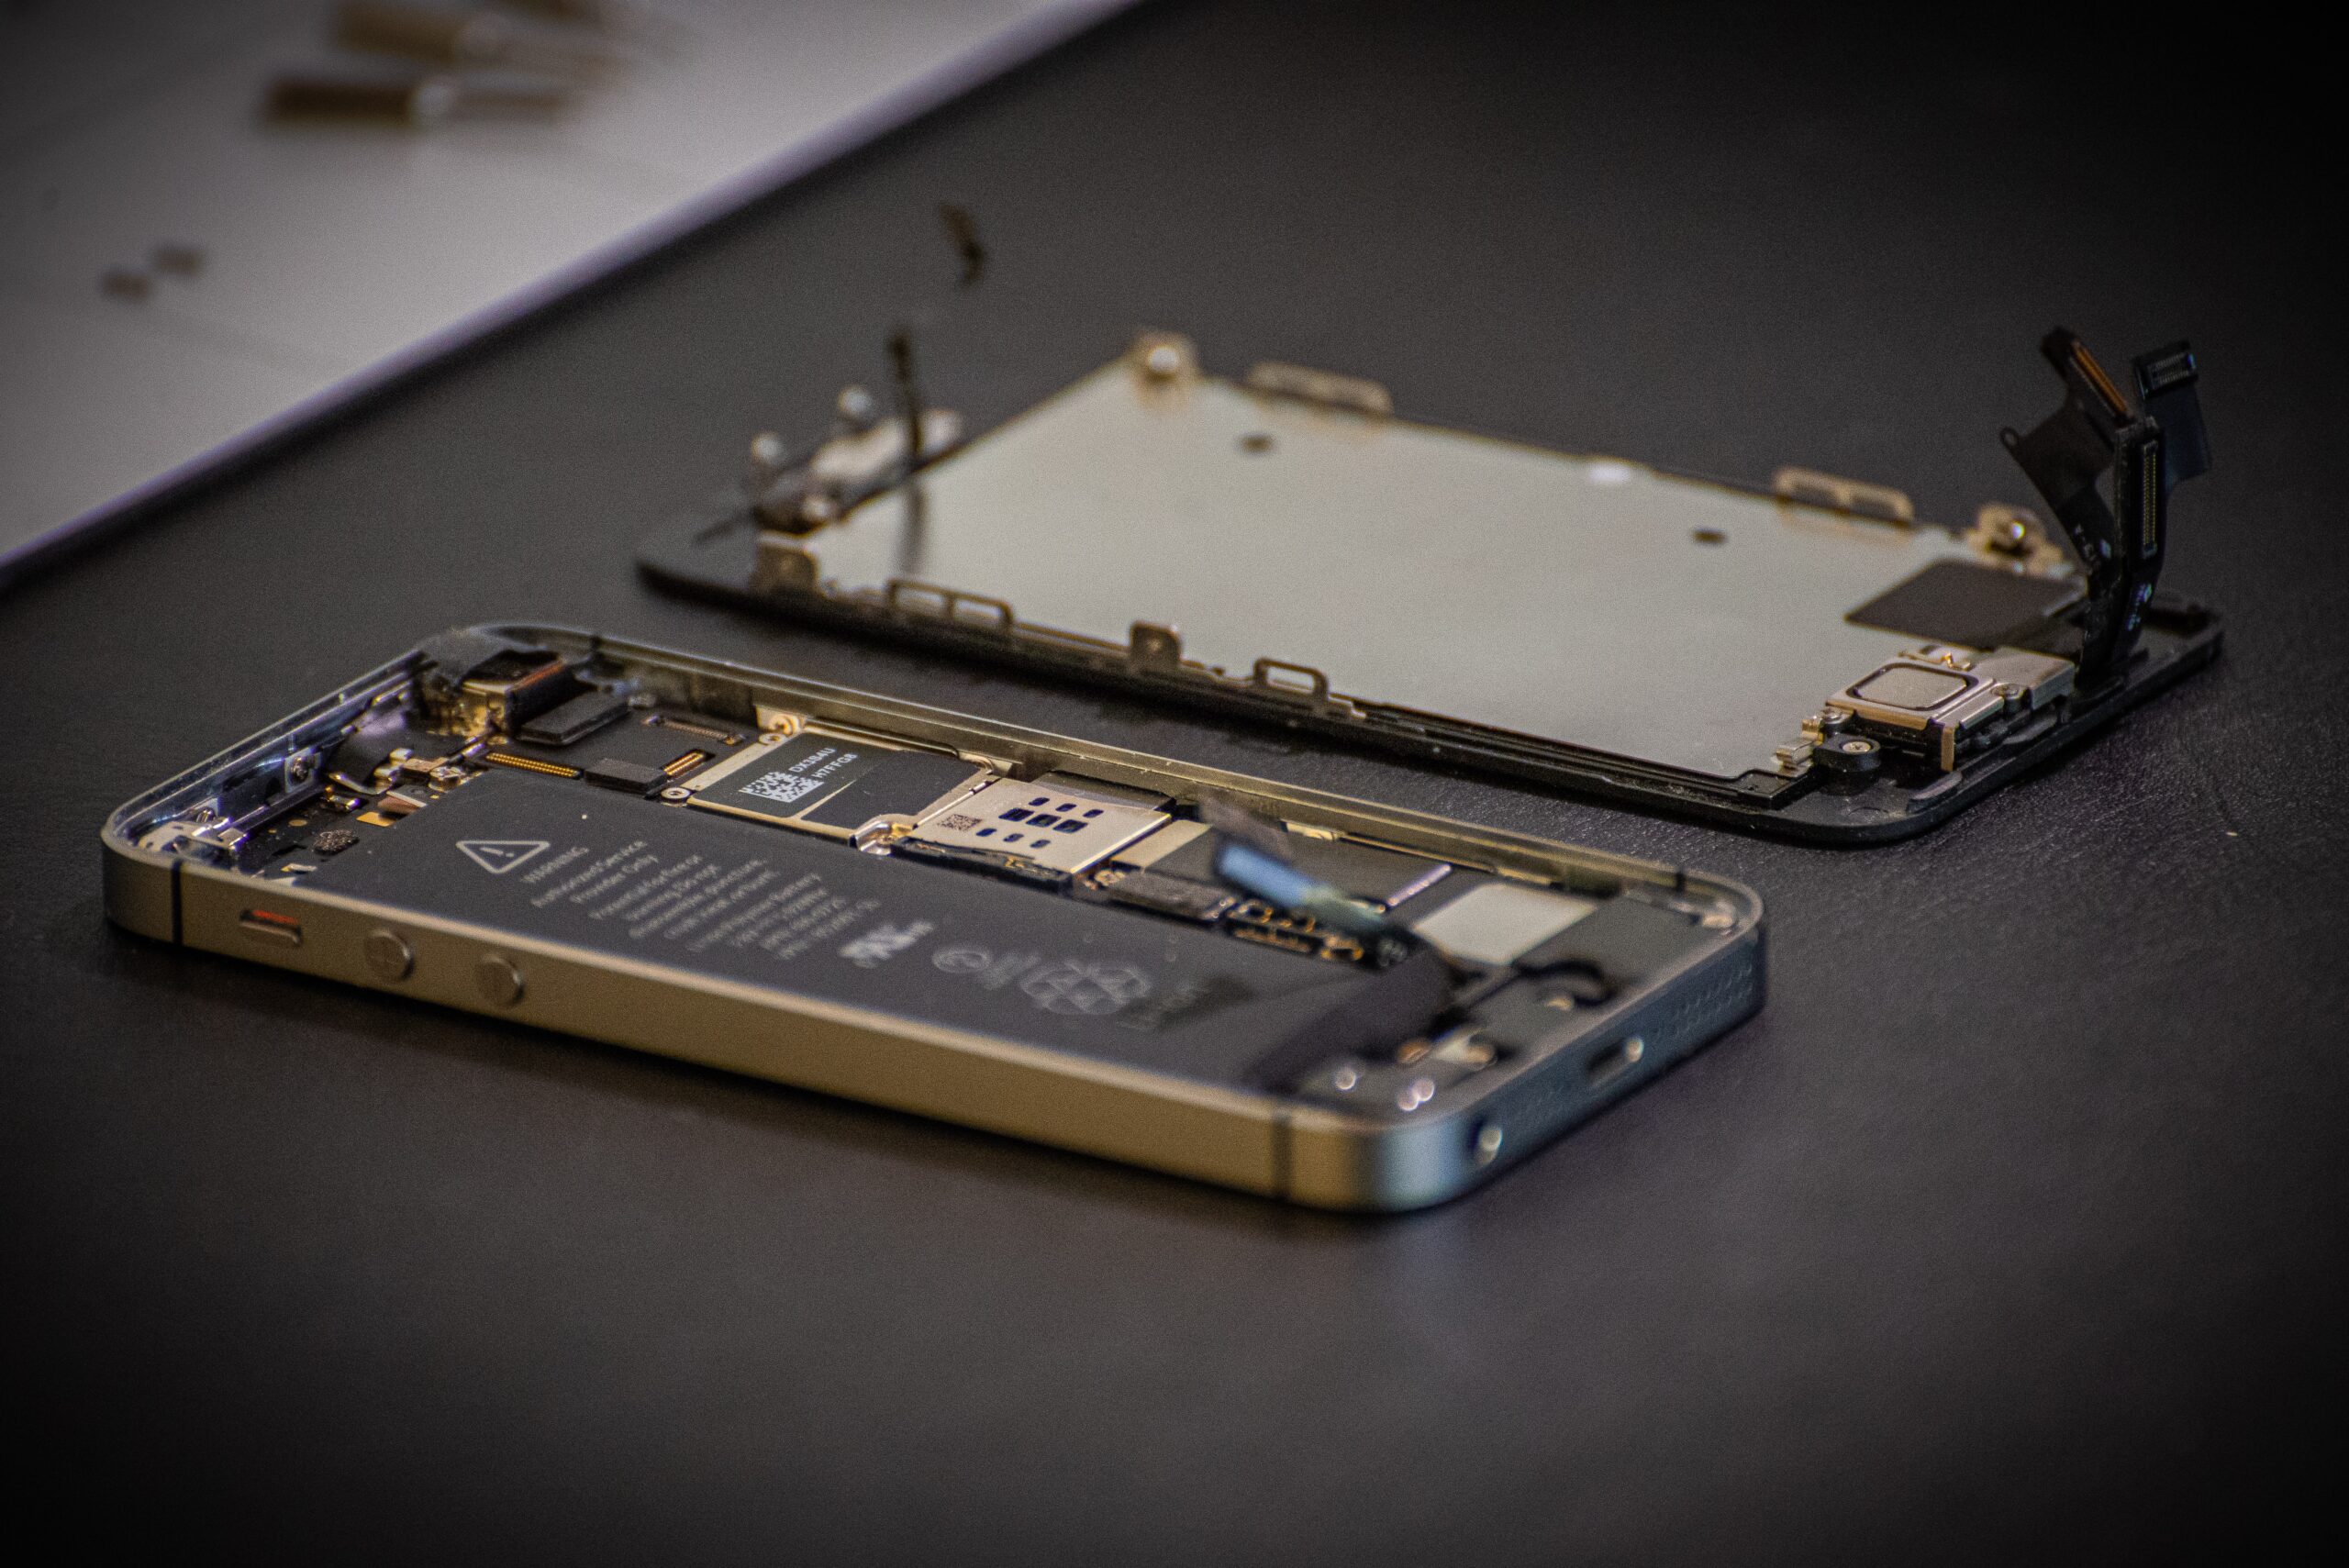 Apple is opening an online repair shop with original iPhone parts